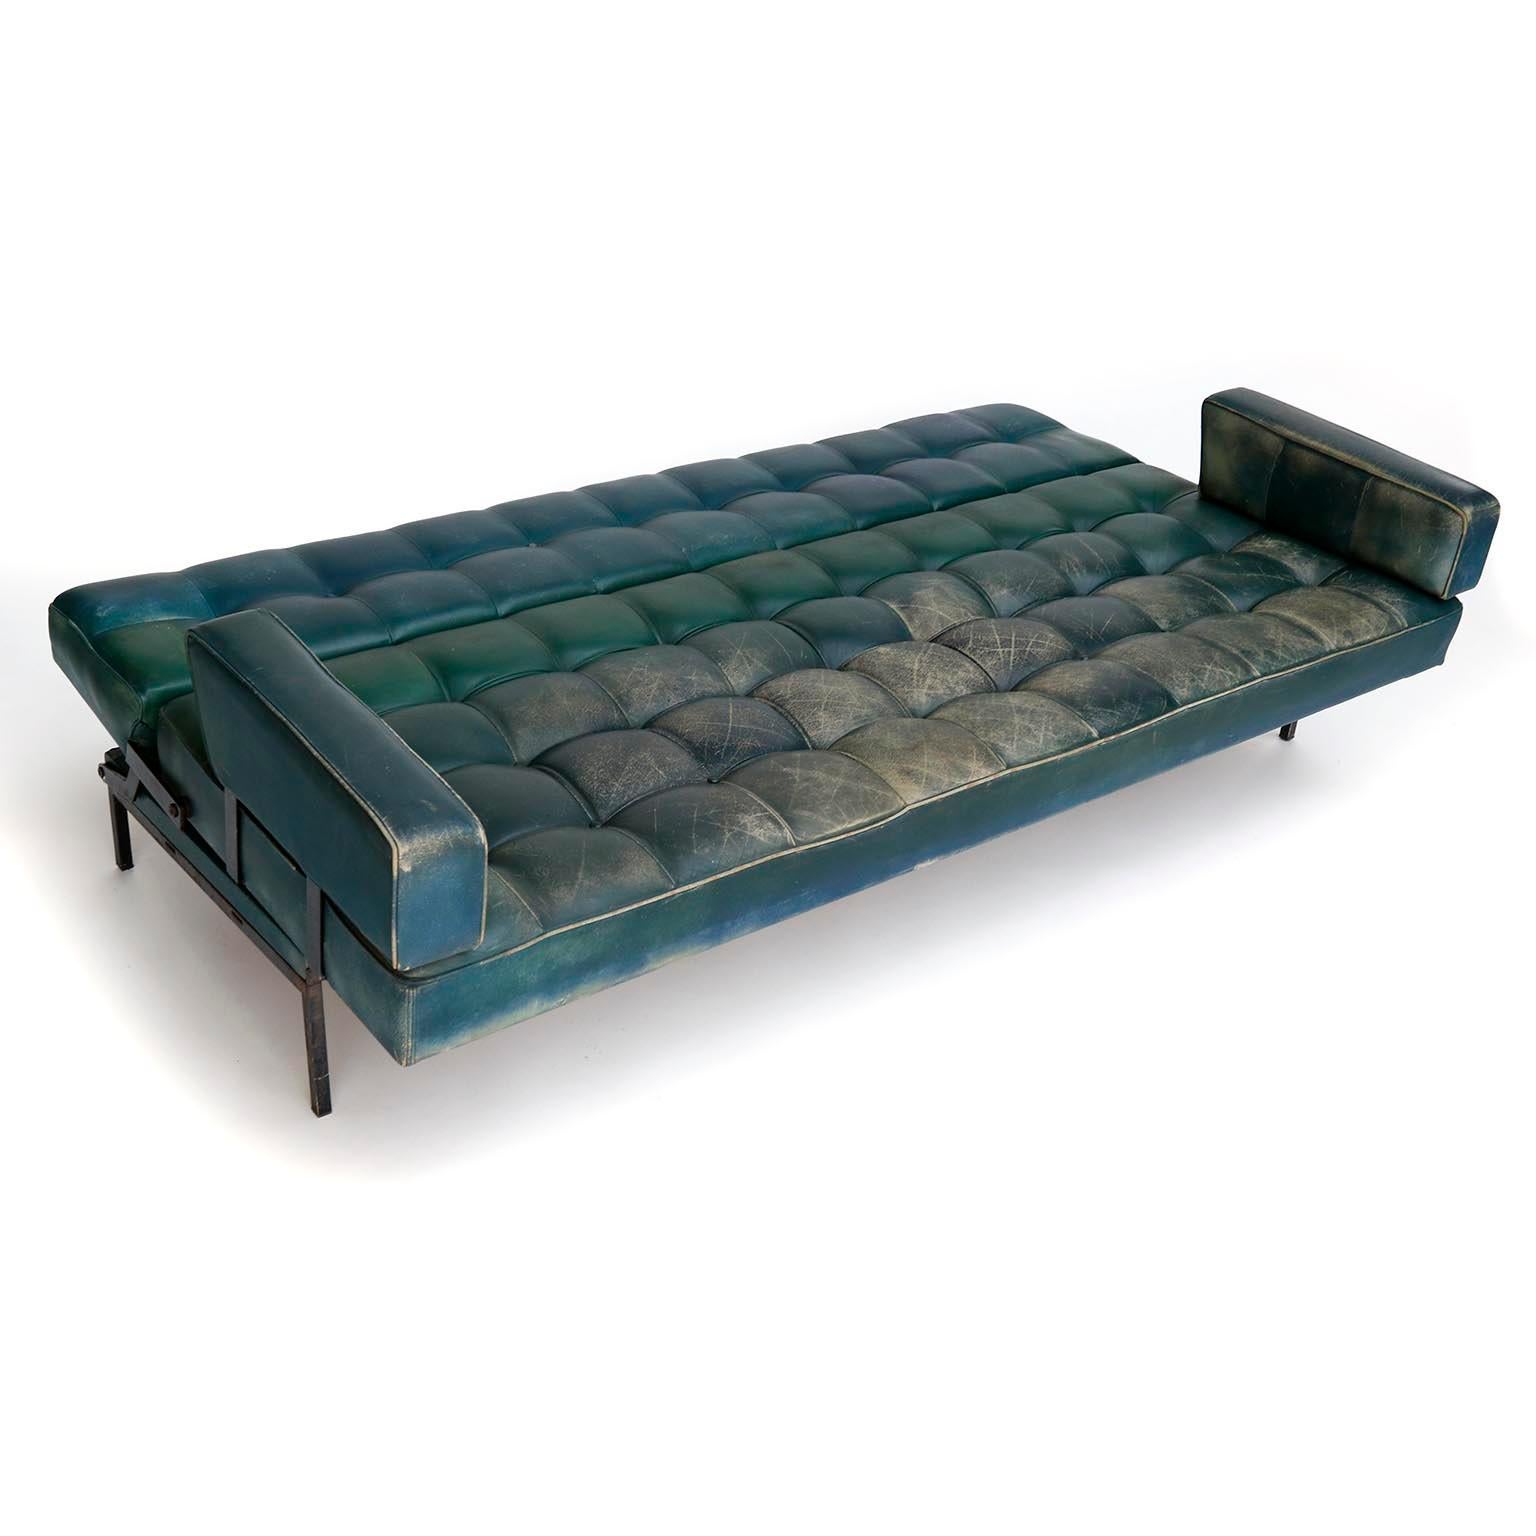 Metal Johannes Spalt 'Constanze' Sofa Daybed Armrests, Patinated Green Leather, 1960s